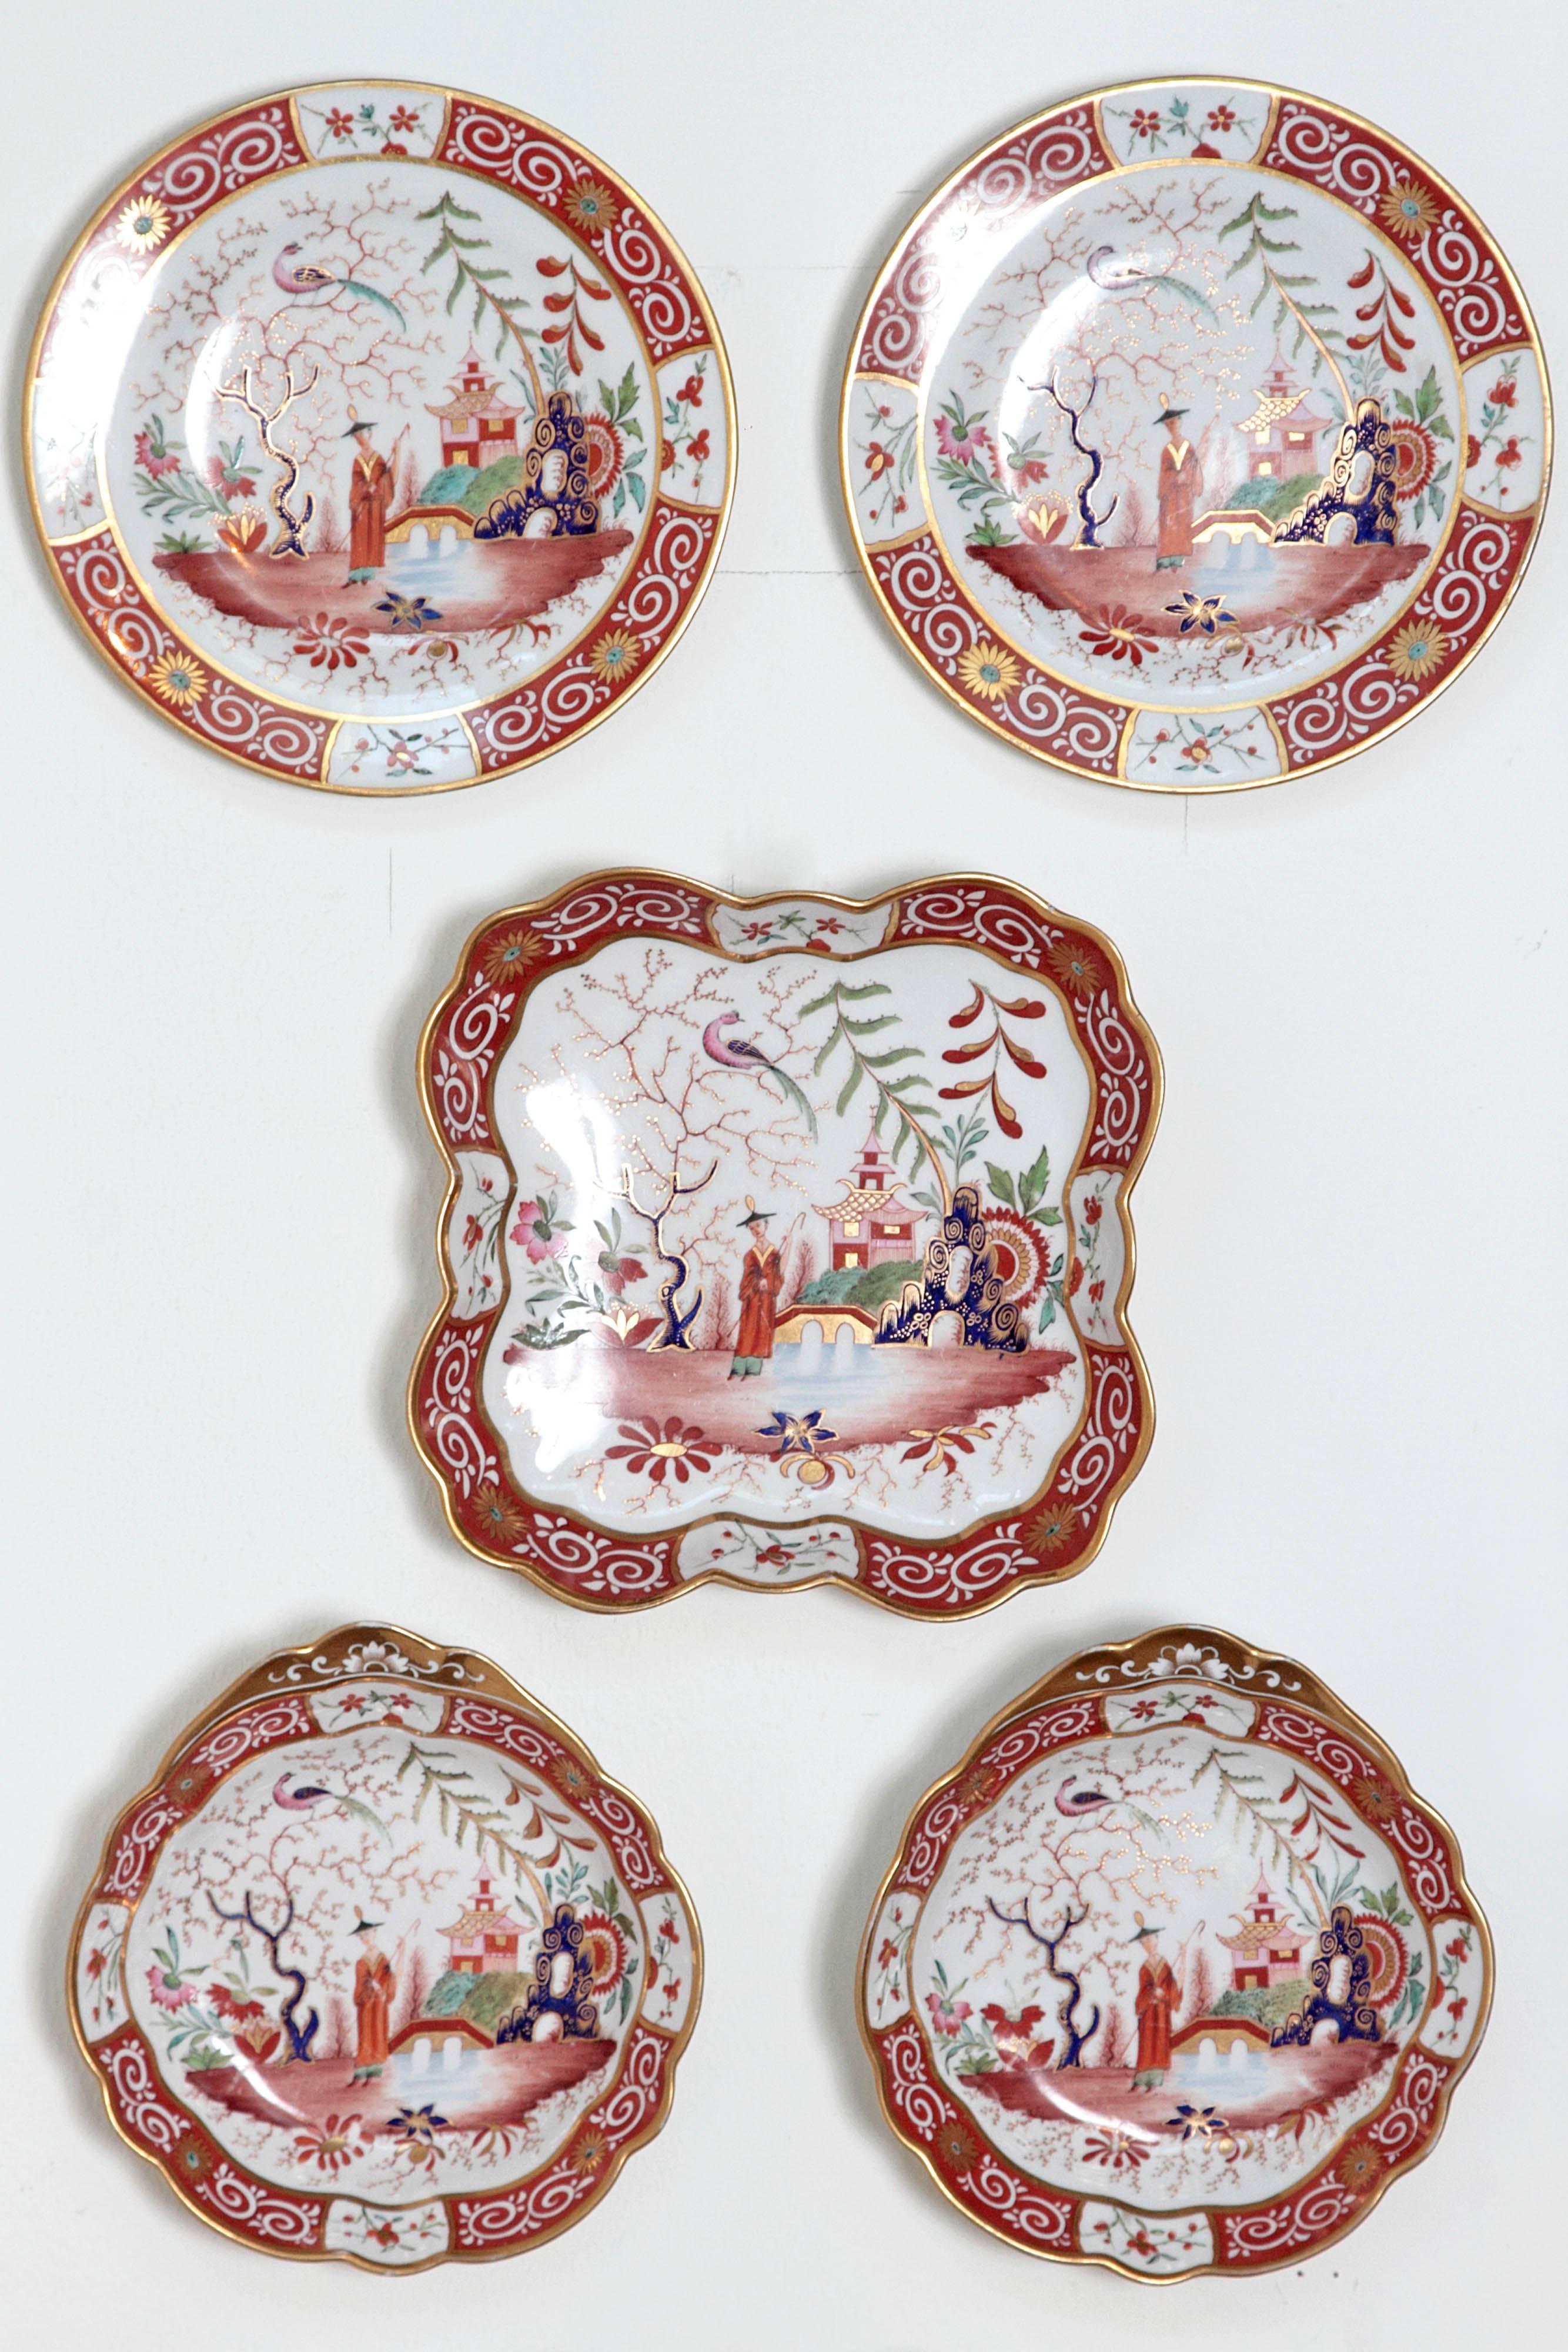 A Chamberlain's Worchester, Flight, Barr and Barr English porcelain 24-piece dessert service with chinoiserie pattern, primarily red and gold on white. Impressed mark for Flight, Barr, and Barr, 1813-1840

Measures: Three square cake plates- 8.25